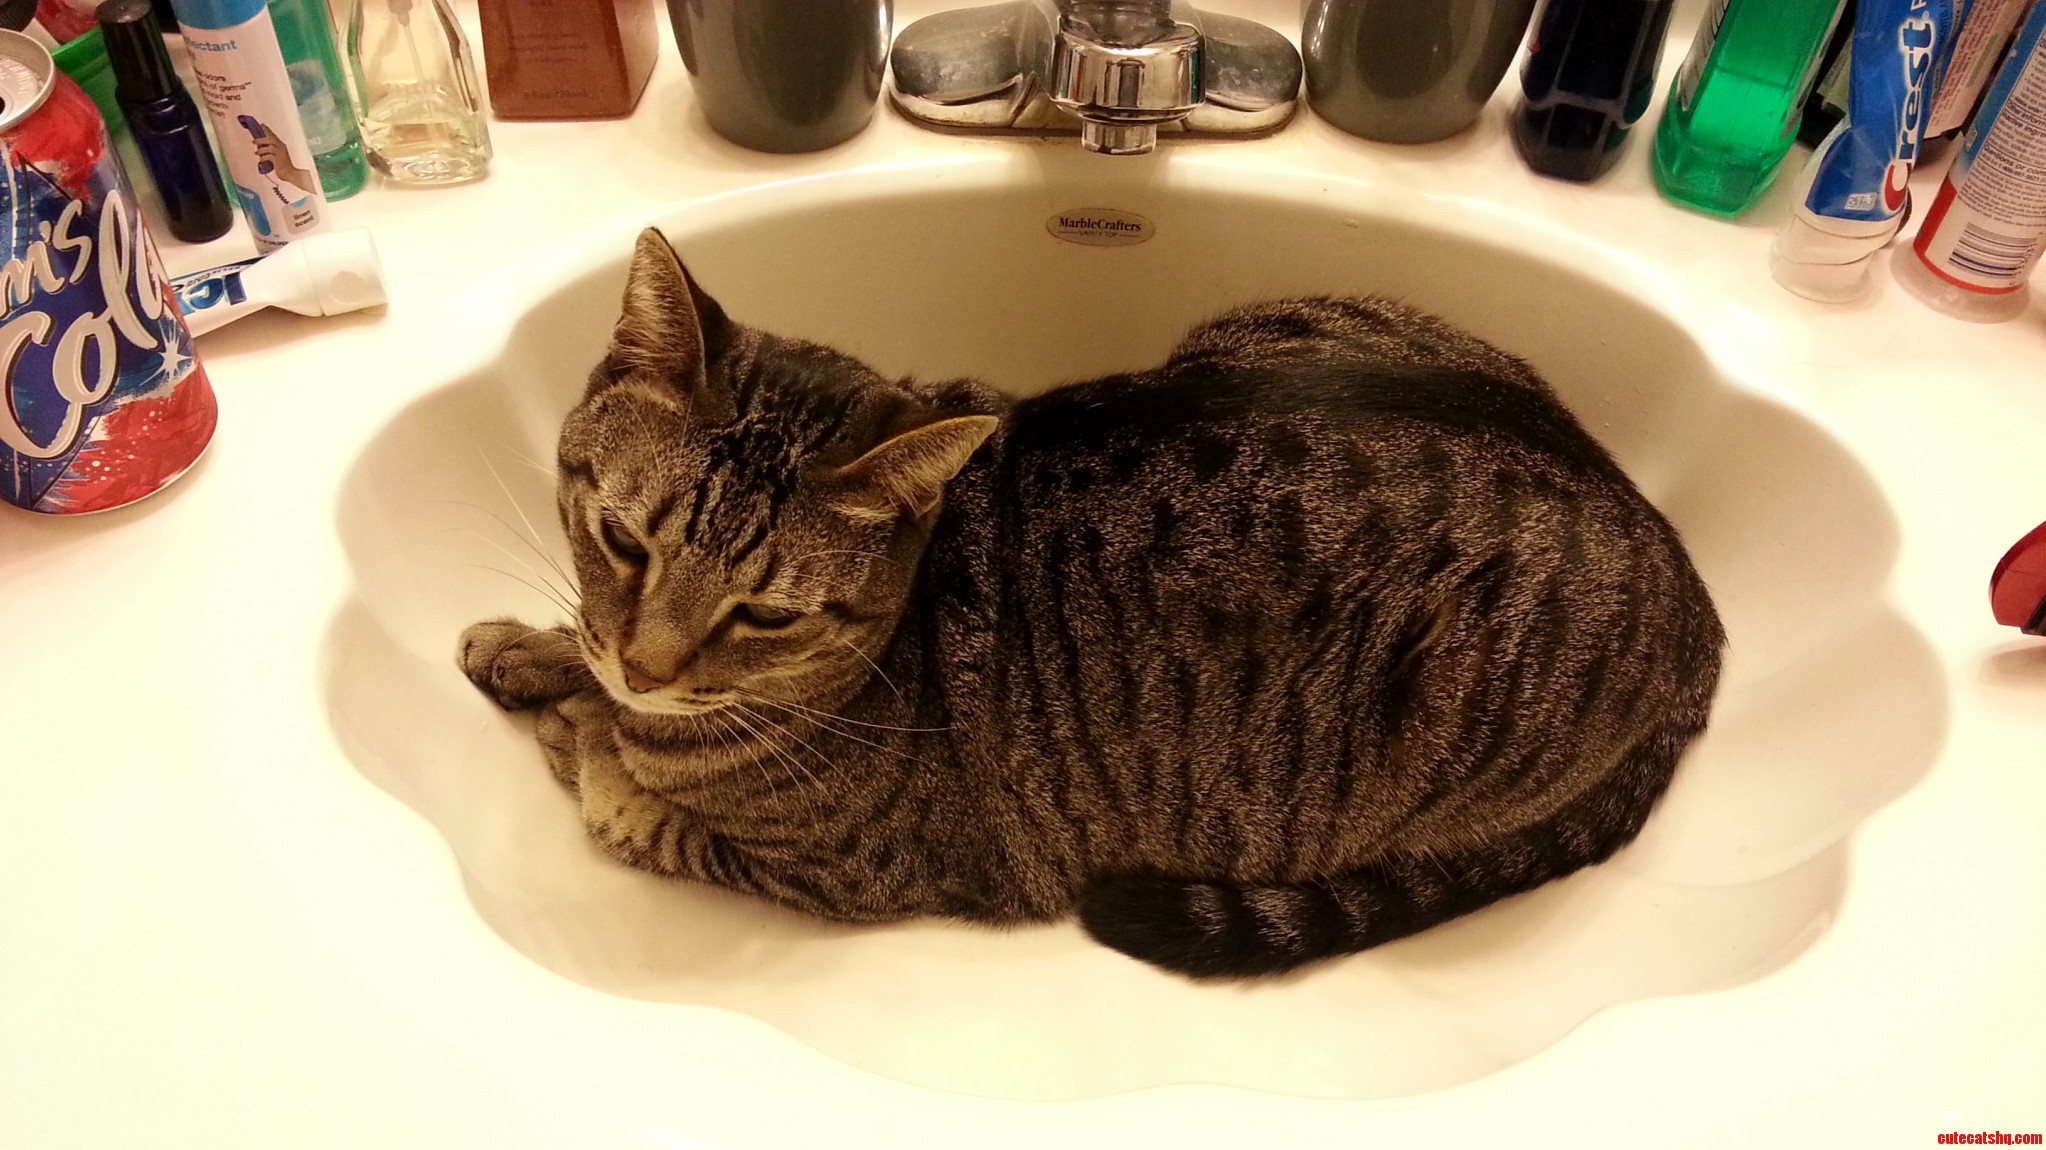 I Keep Telling Him That I Need To Use The Sink But I Get The Feeling He Doesnt Really Care.